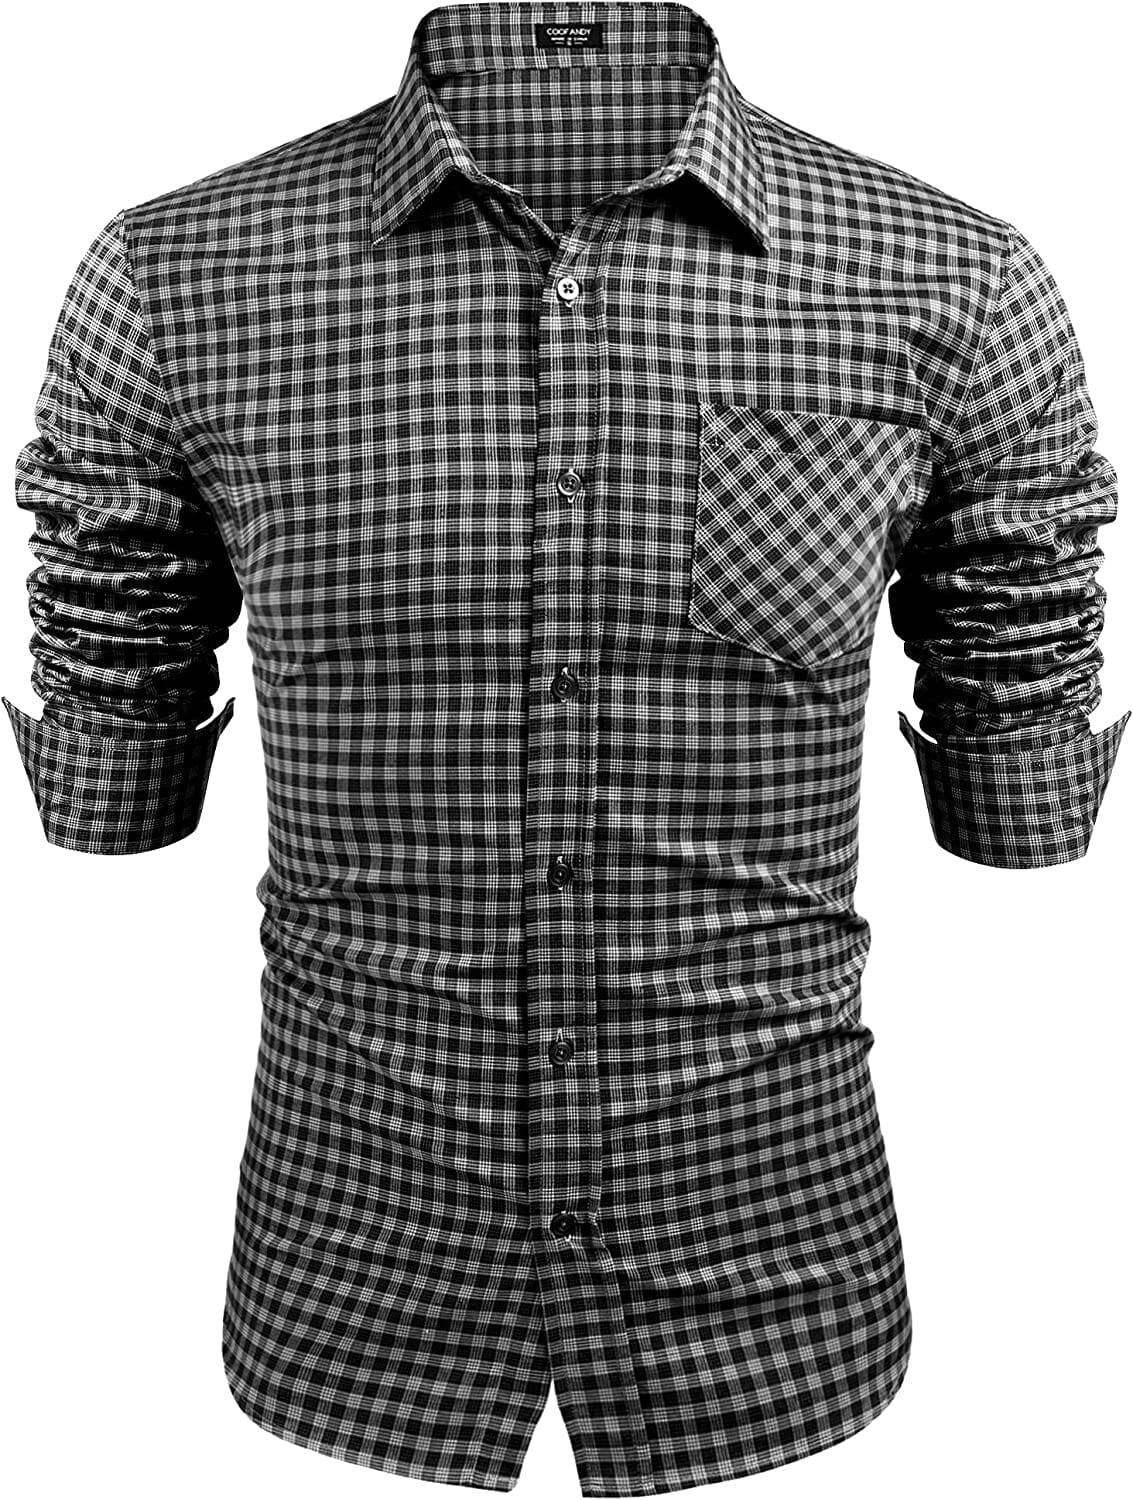 Business Button Up Plaid Shirts (US Only) Shirts Coofandy's Black Grid S 